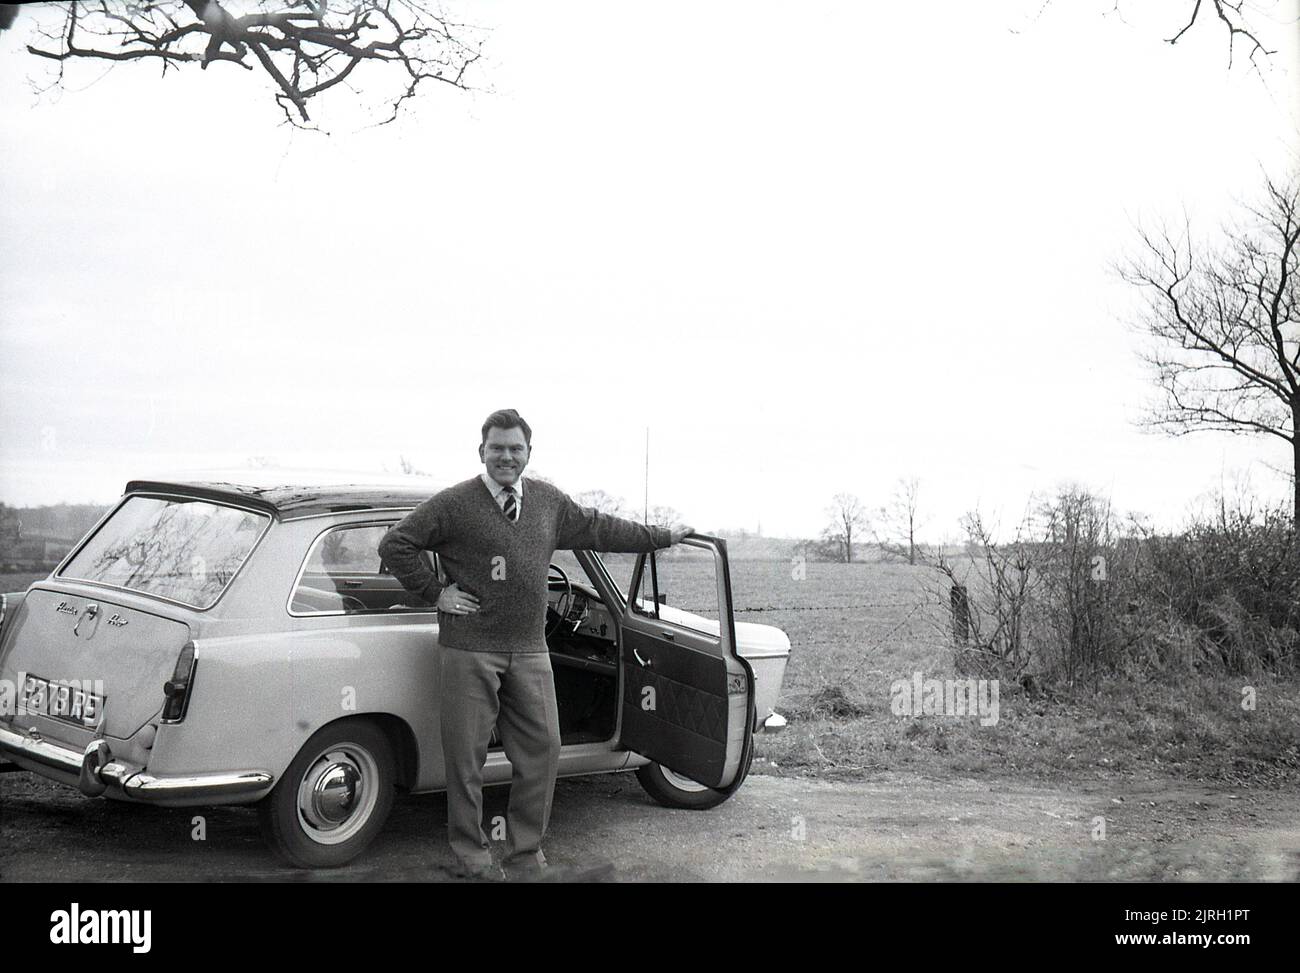 1958, historical, outside in the countryside, on a small farm lane, a man standing by an Austin A40 Farina car of the era, England, UK. A modern small car, with a distinctive 'two box' shape and headroom in the back seat, it was a look created by notable Italian automobile designer Battista Farina, famous for his work with Ferrari and the Alfa Romeo Spider. The car was produced up to 1967, when it was succeeded by the Austin 1100. Stock Photo